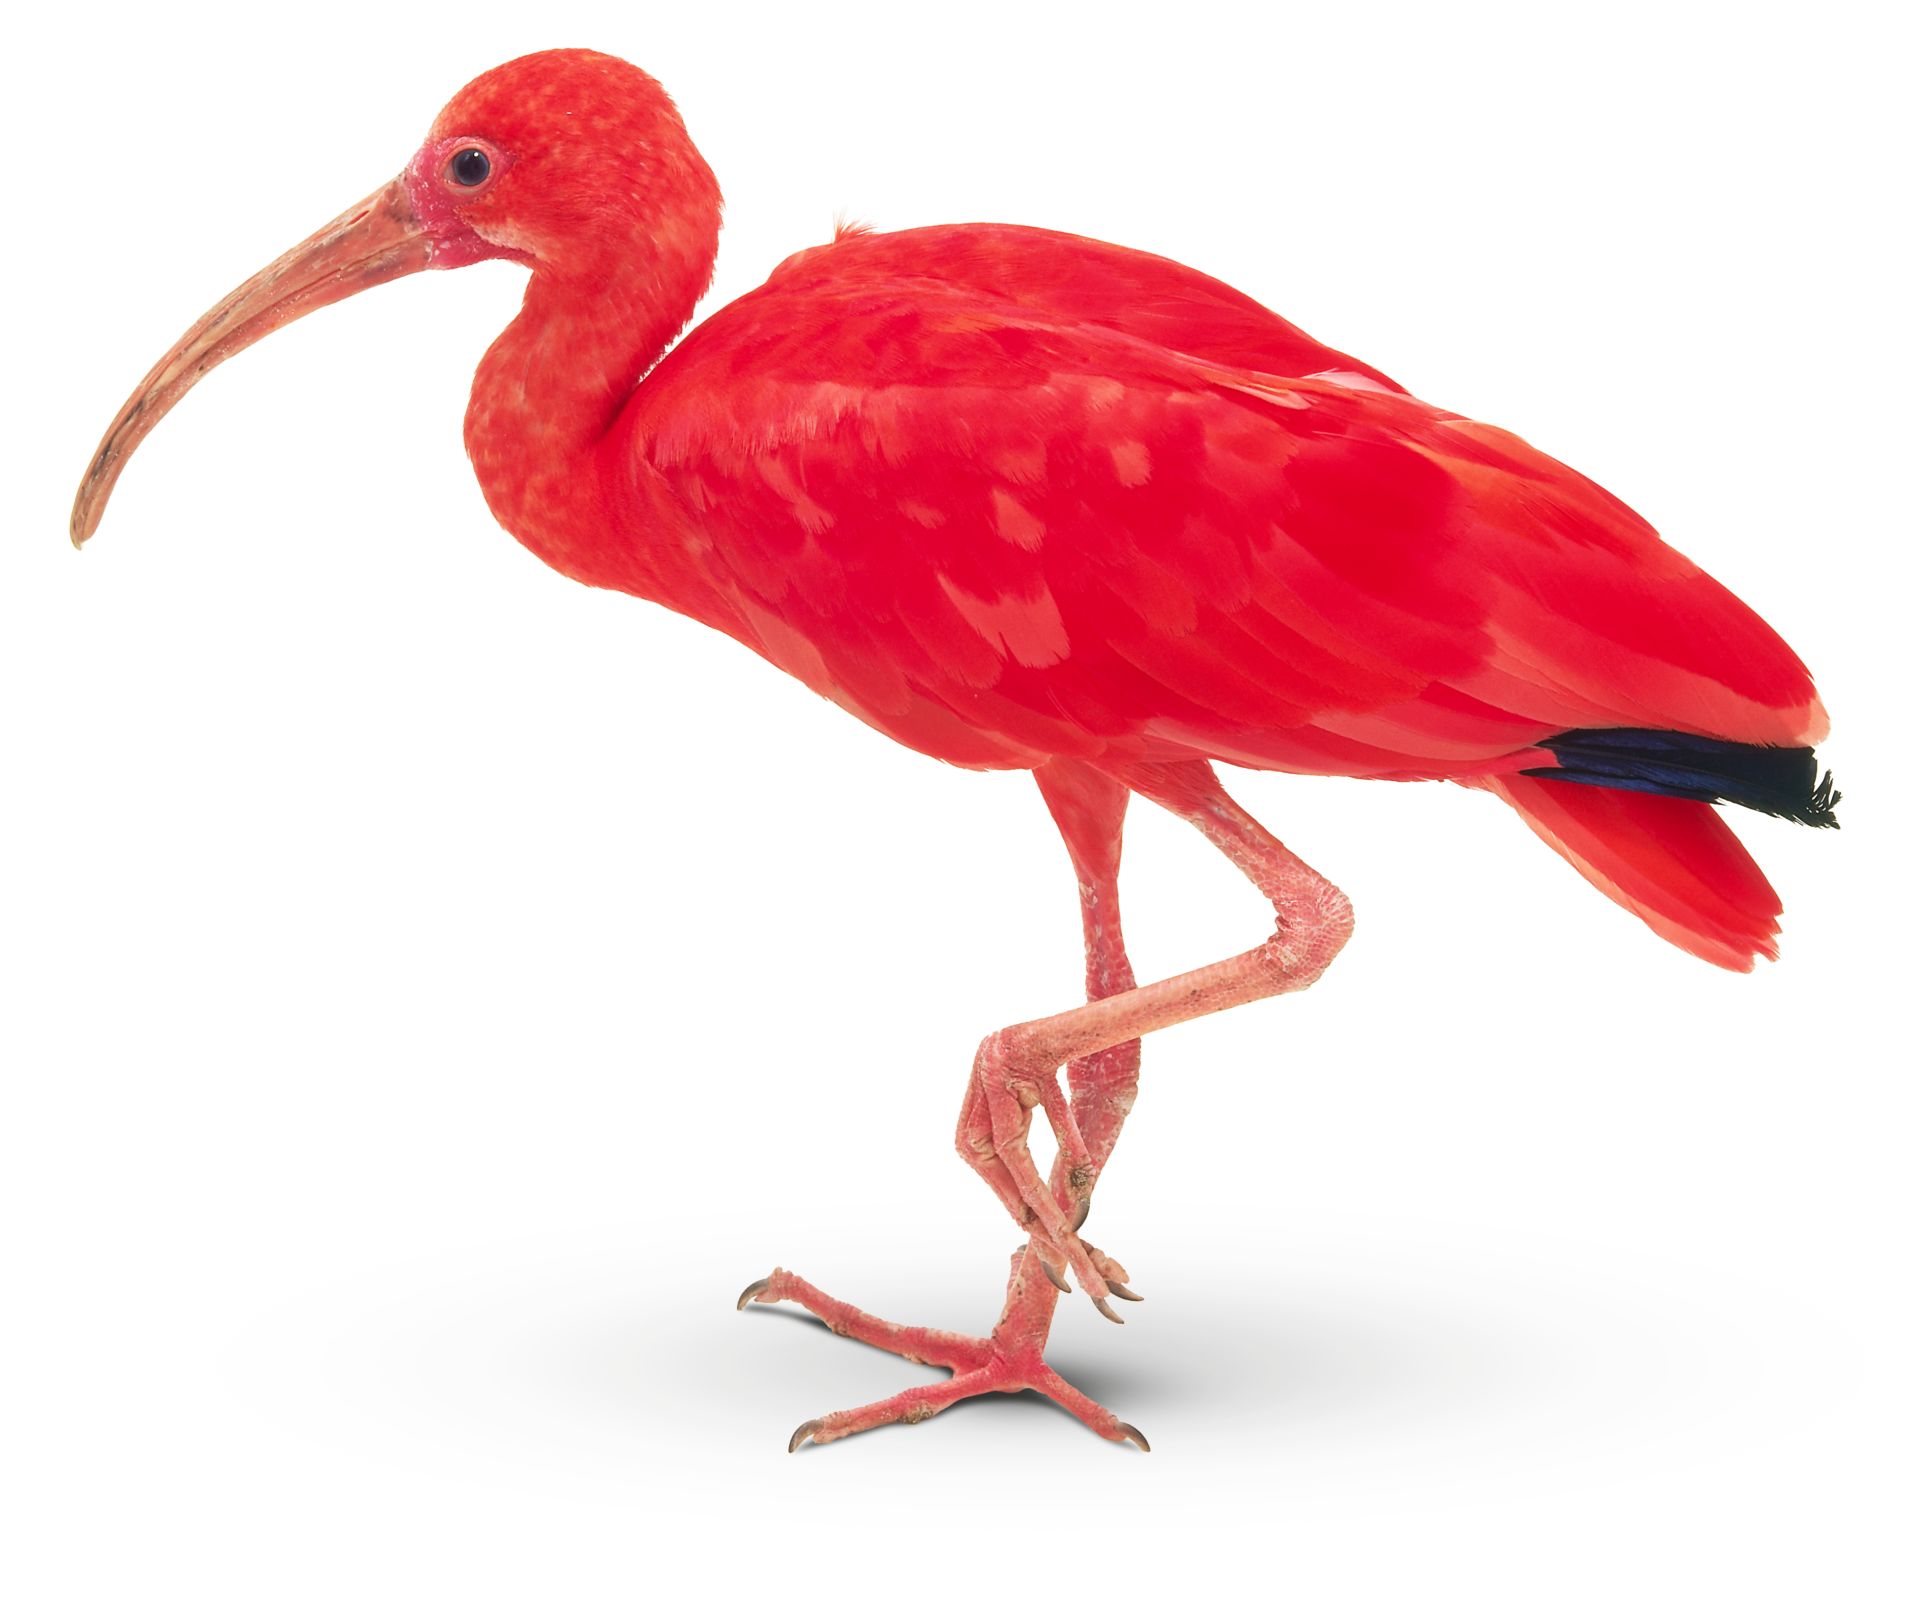 Scarlet Ibis Bird Facts For Kids | DK Find Out